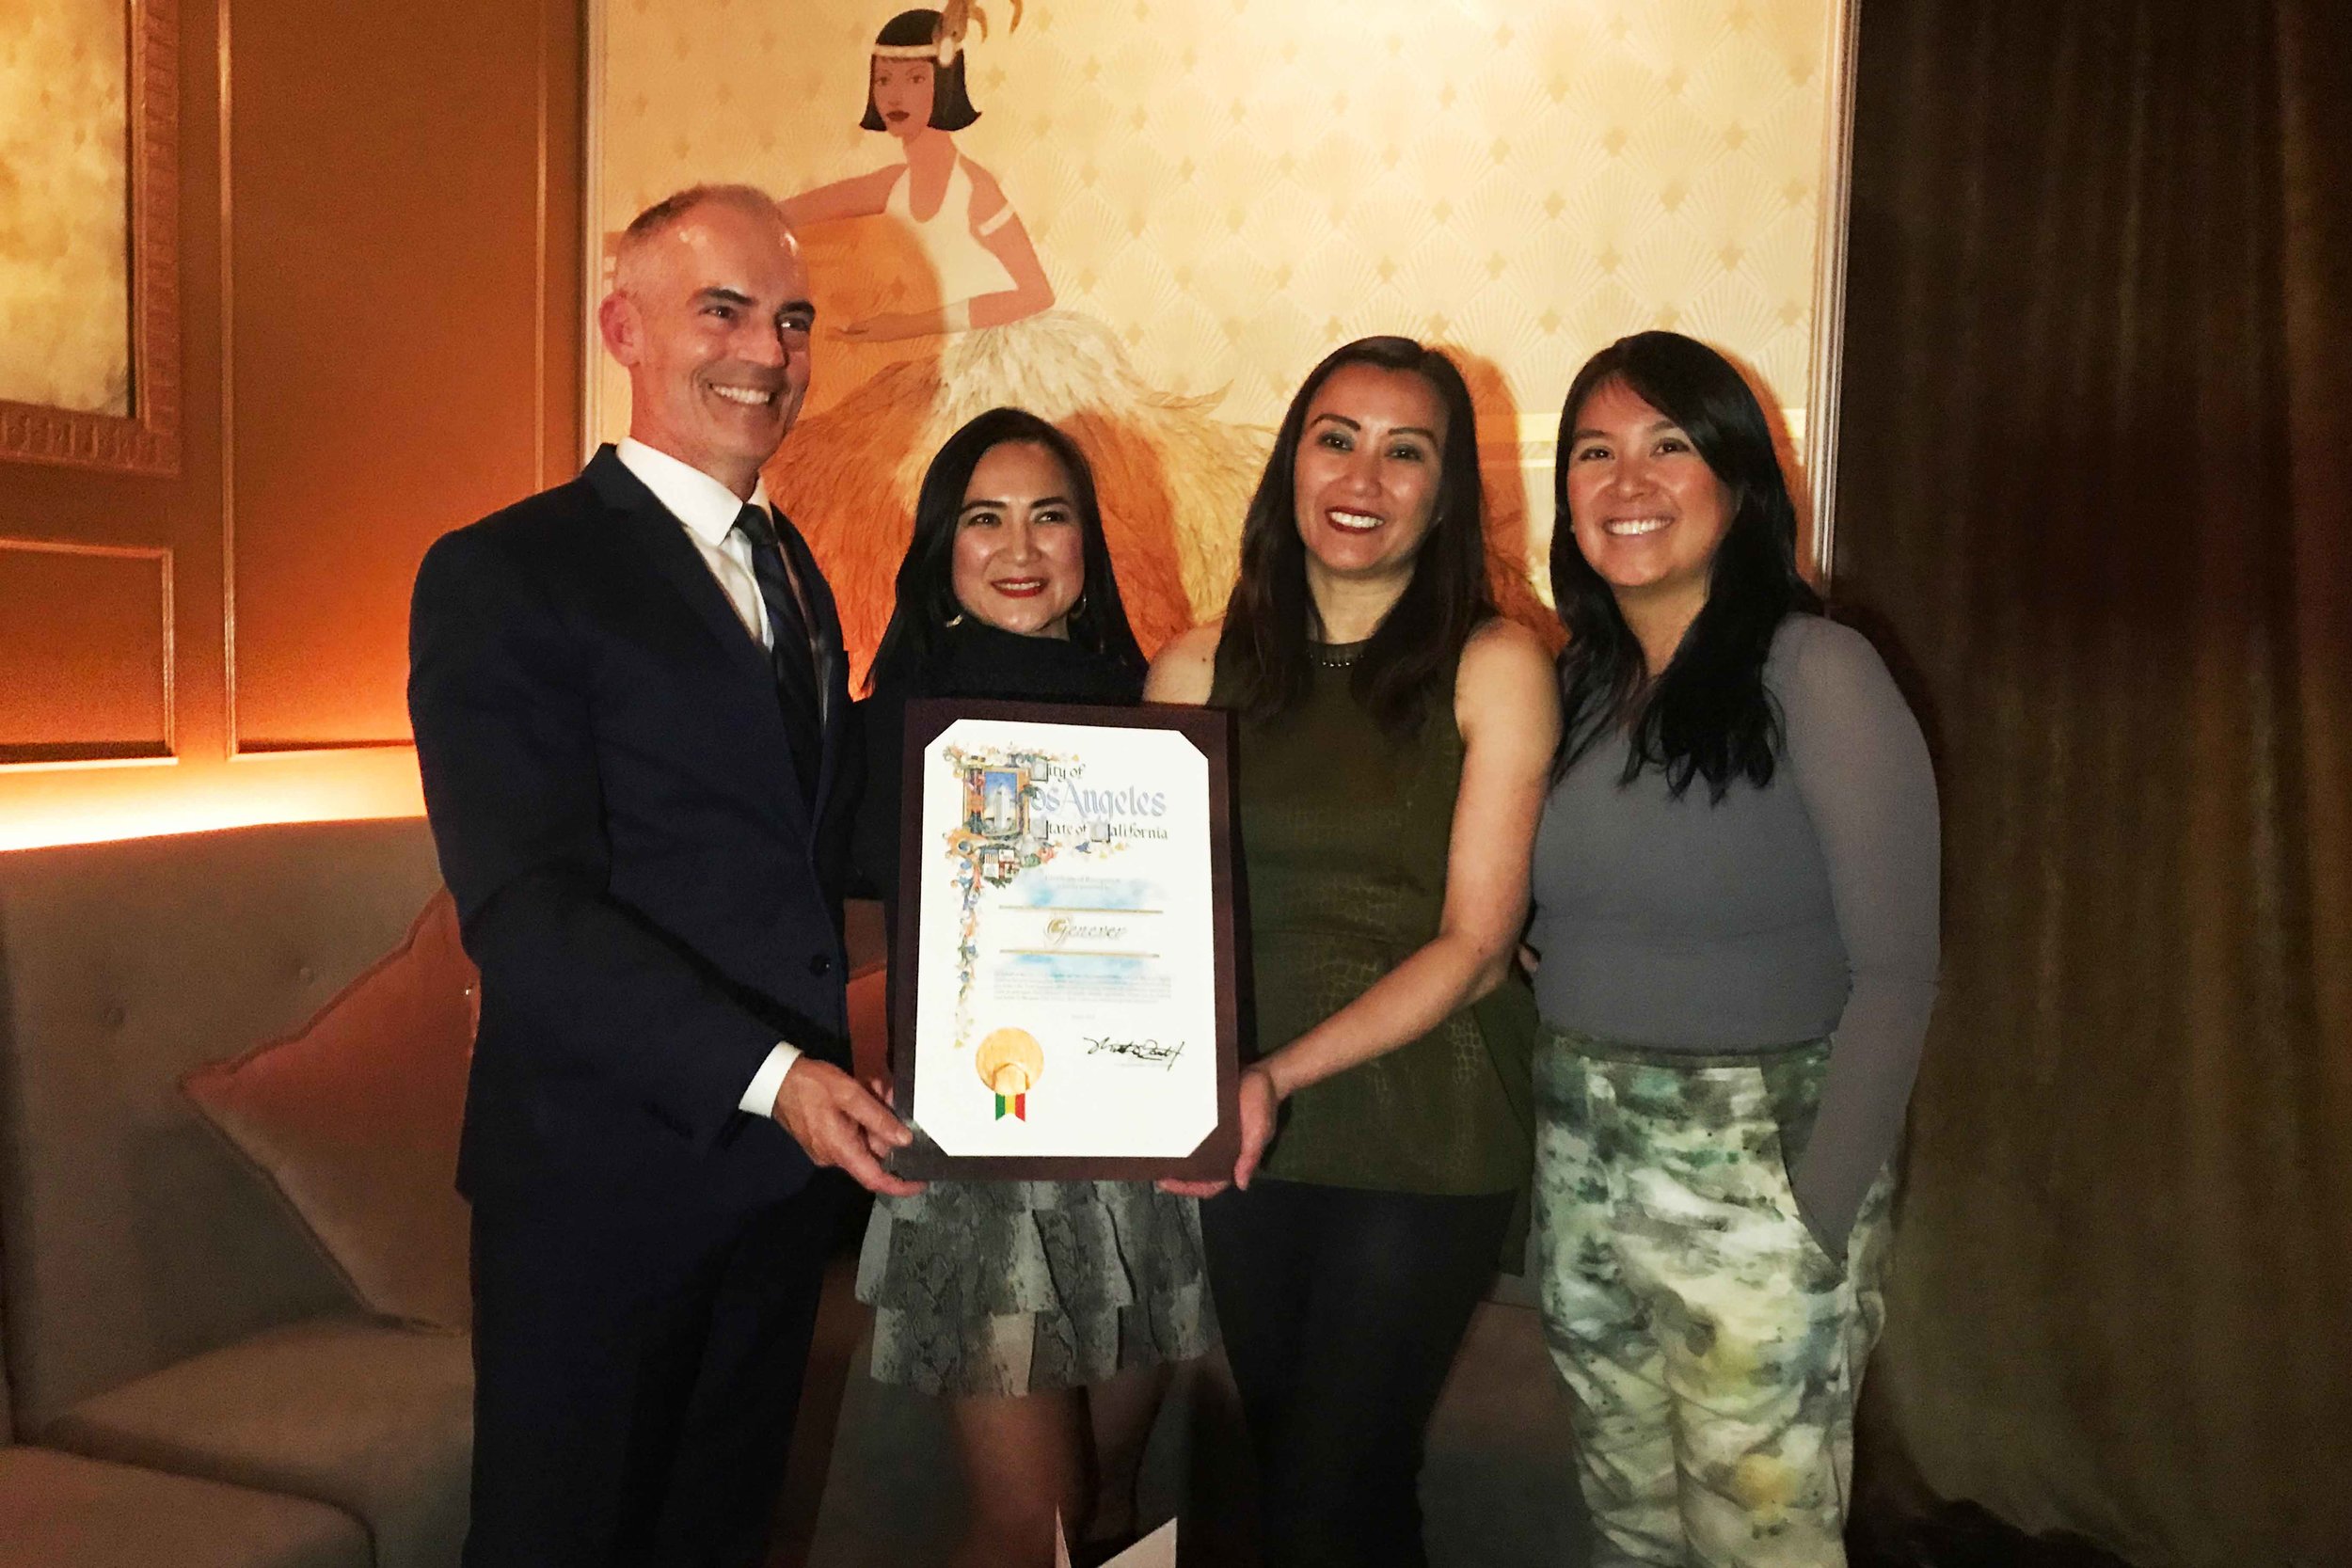  Councilmember Mitch O’Farrell presents the City Certificate of Recognition to Genever owners Christine “Tinette” Sumiller, Patricia “Tricia” Perez, and Roselma Samala. Photo by Paola Mardo. 